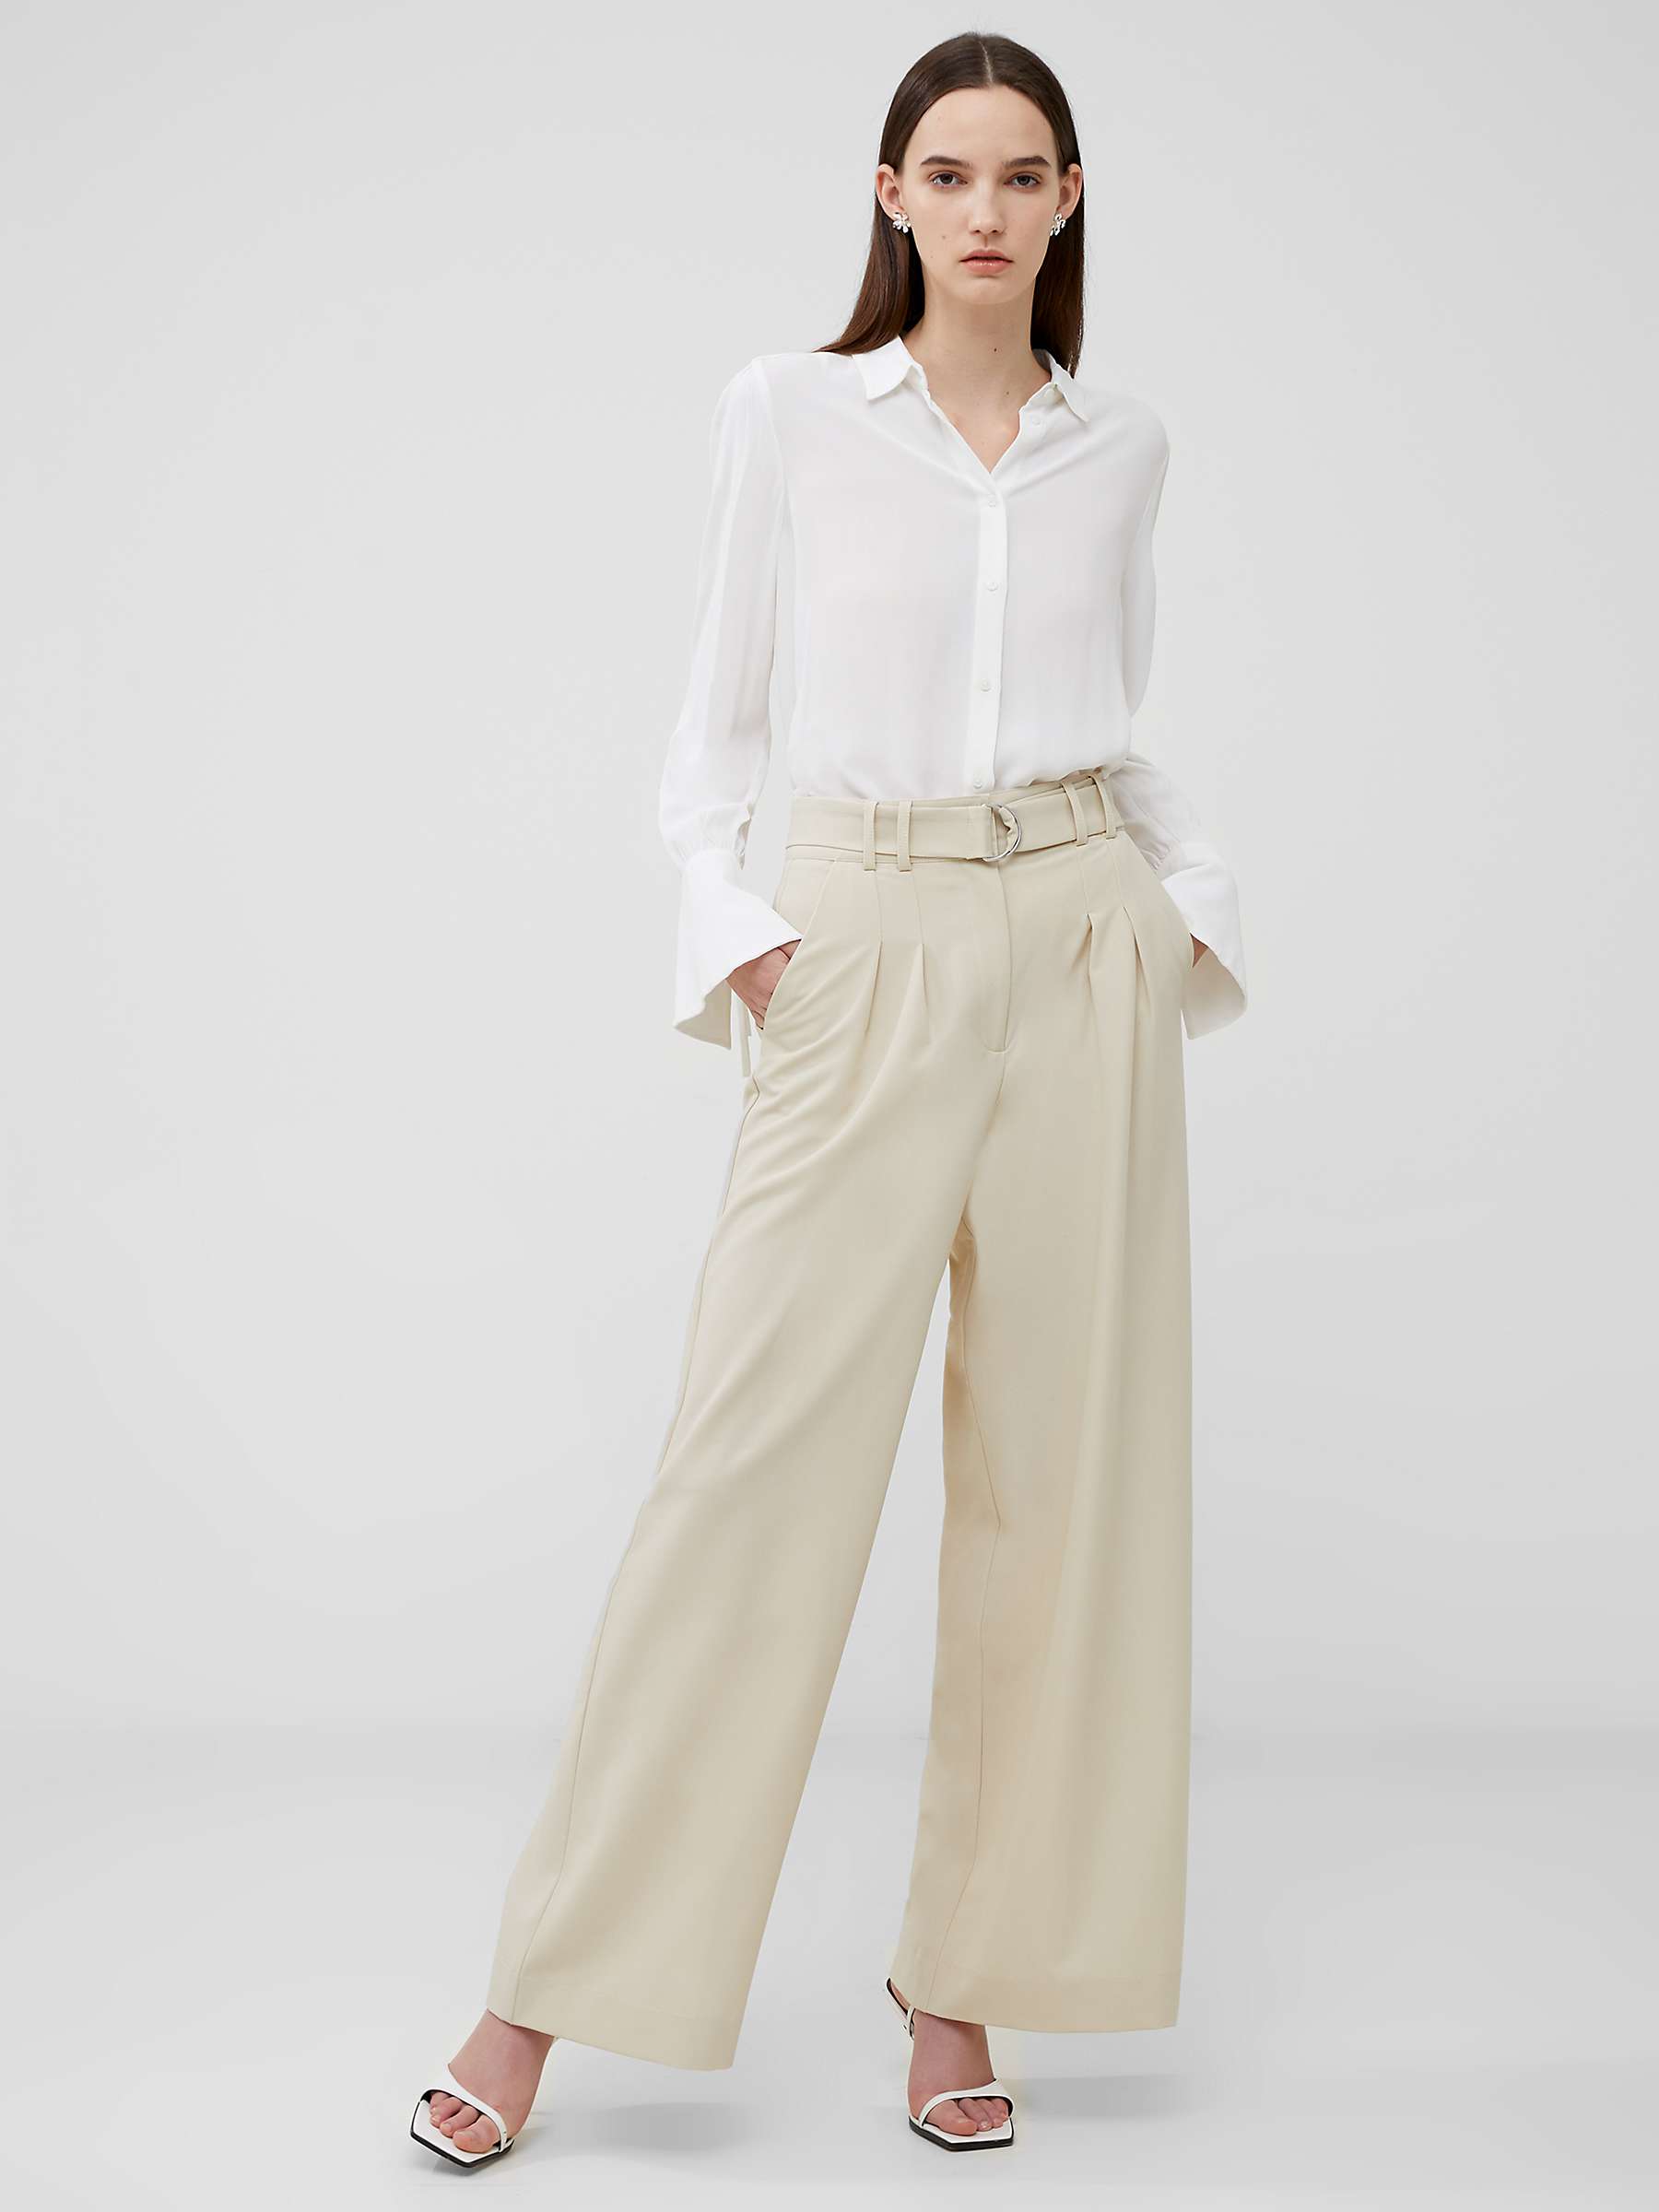 Buy French Connection Everly High Waist Wide Leg Trousers, Oyster Grey Online at johnlewis.com